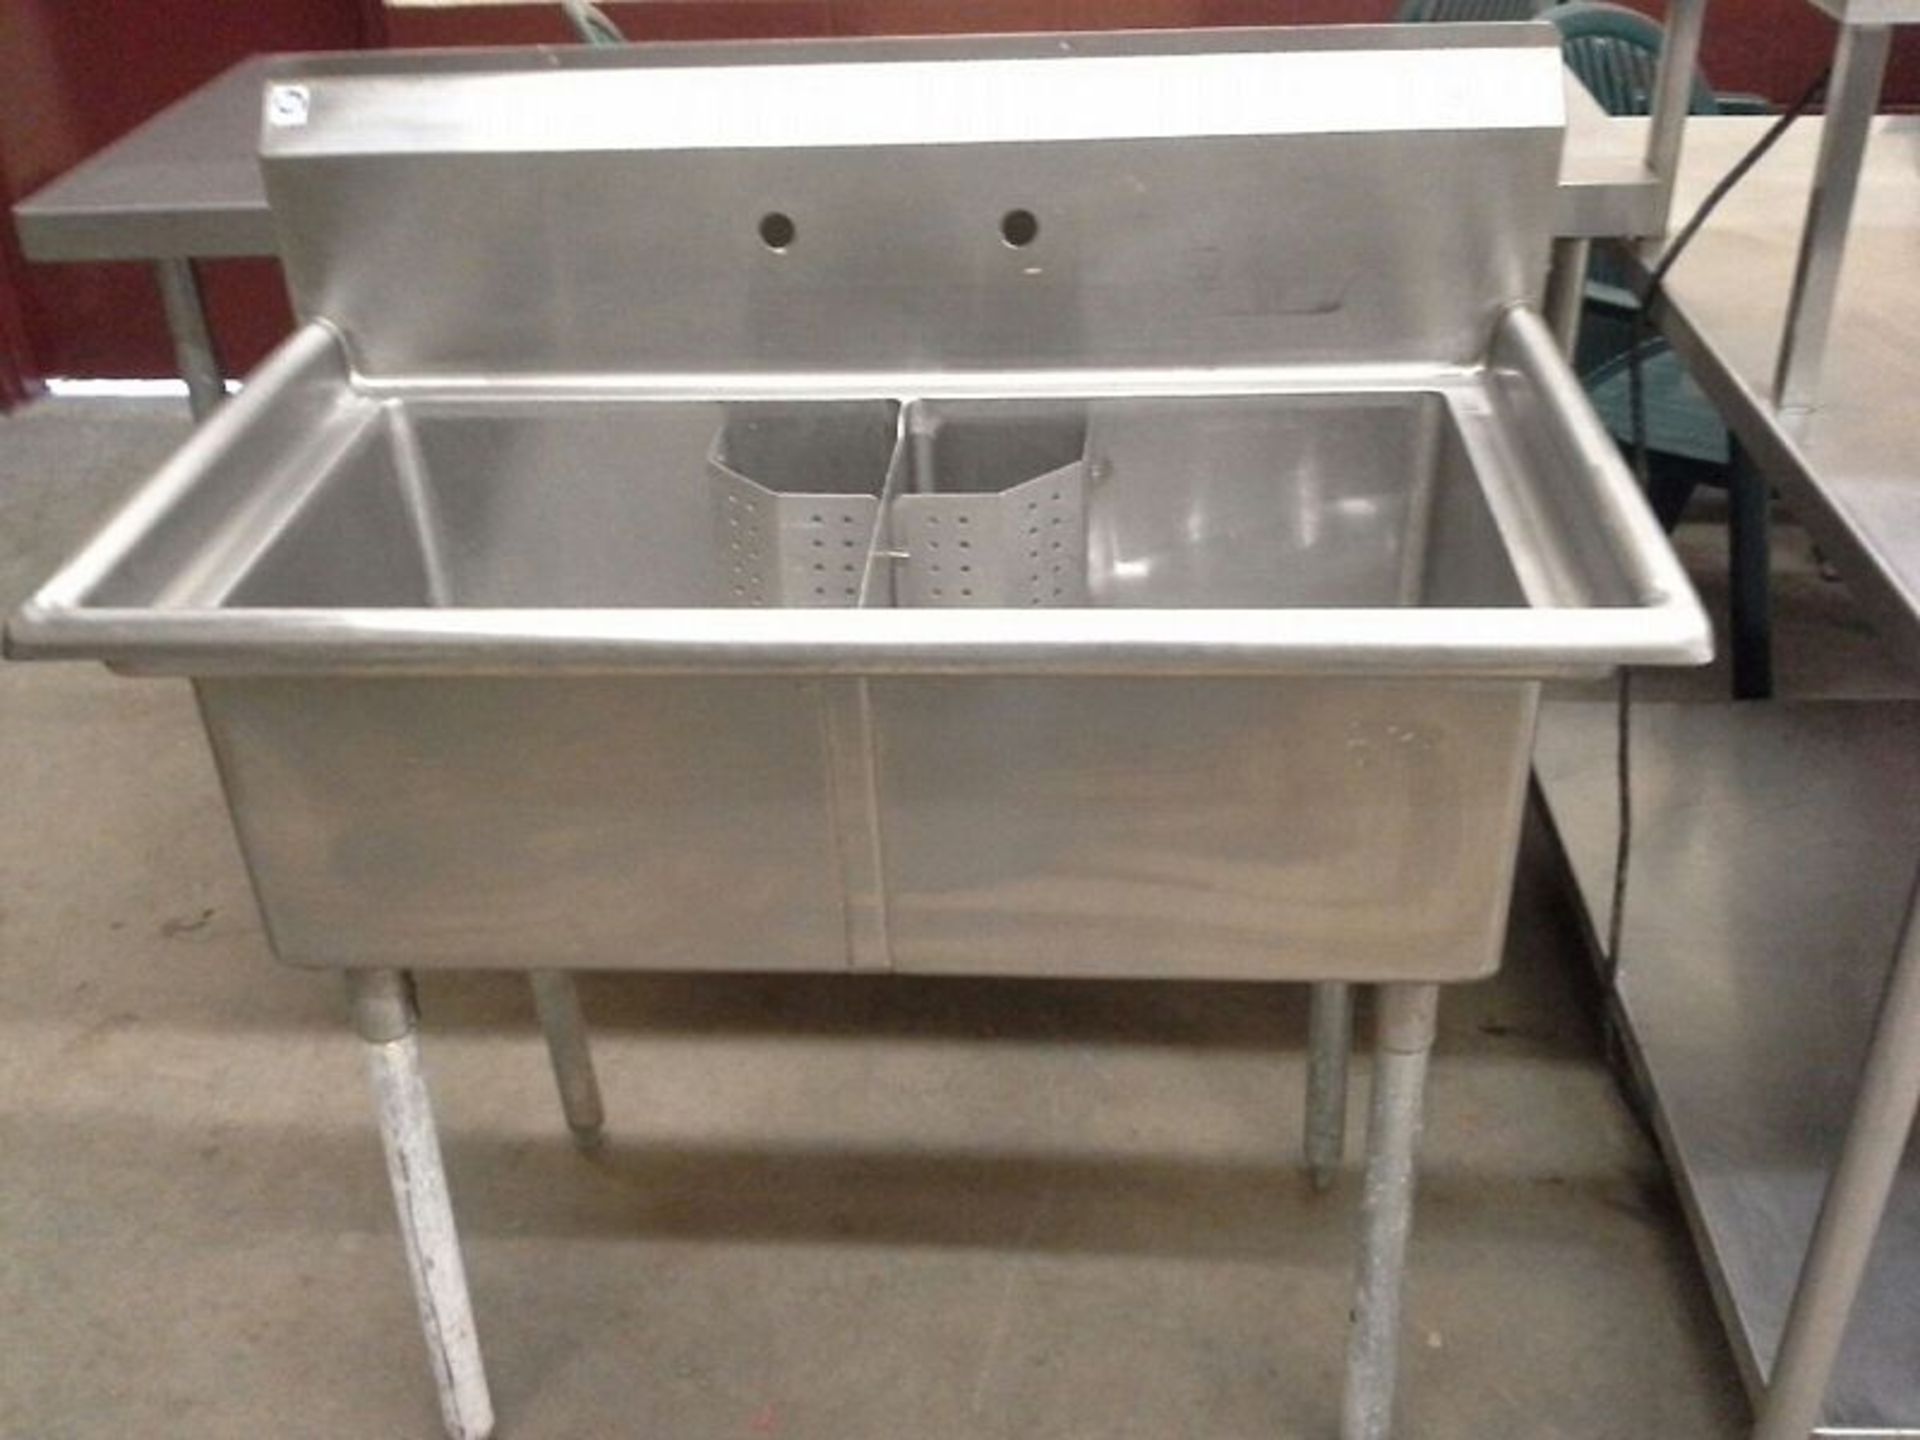 42" Stainless Steel 2 Compartment Sink